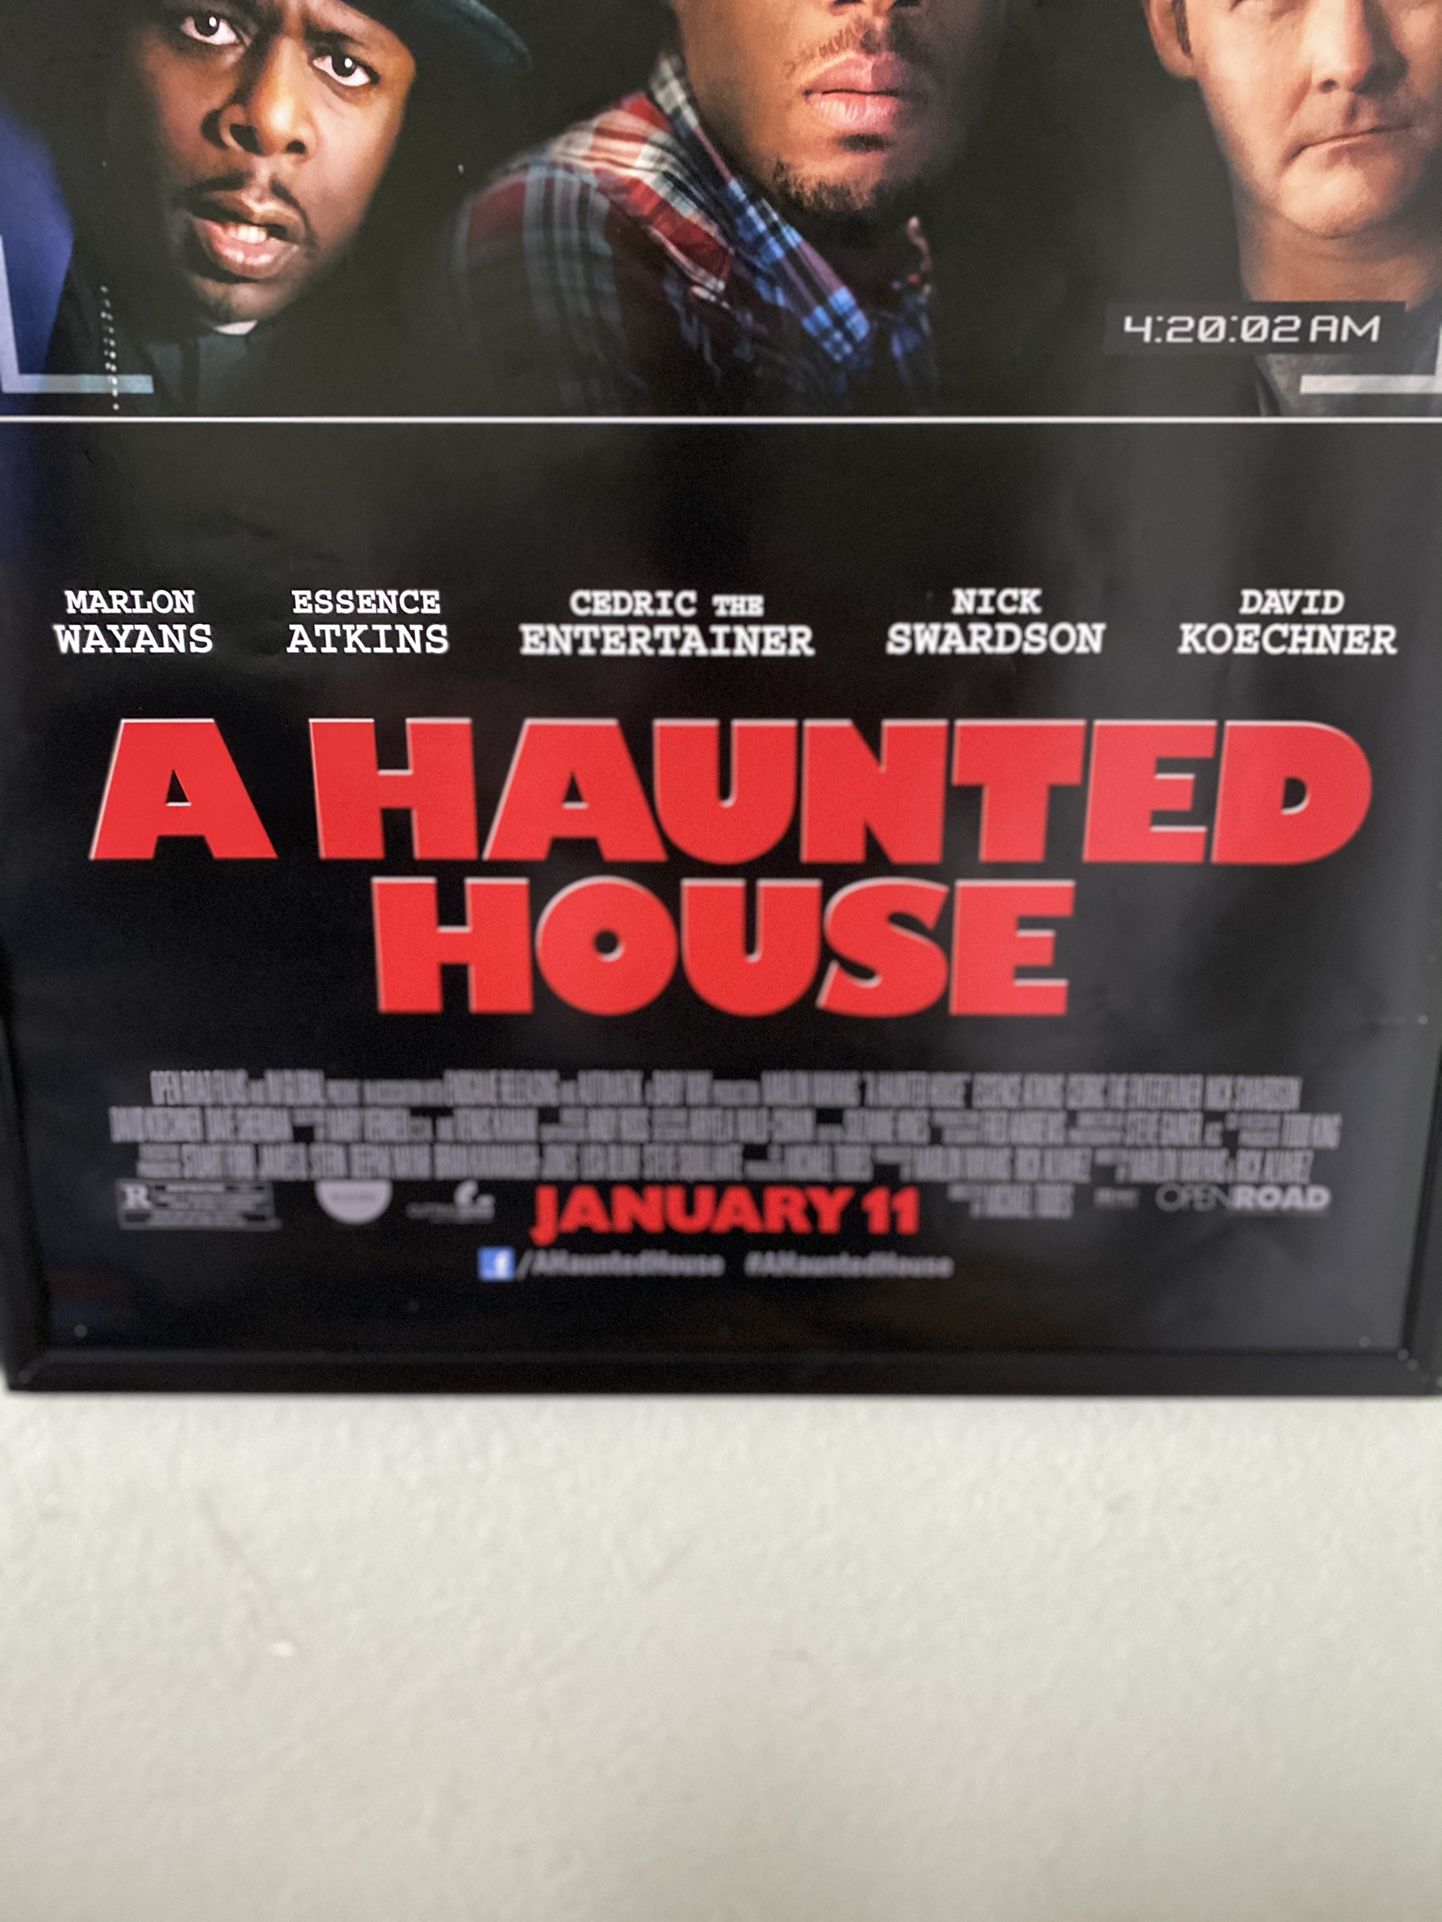 haunted house 2 movie poster